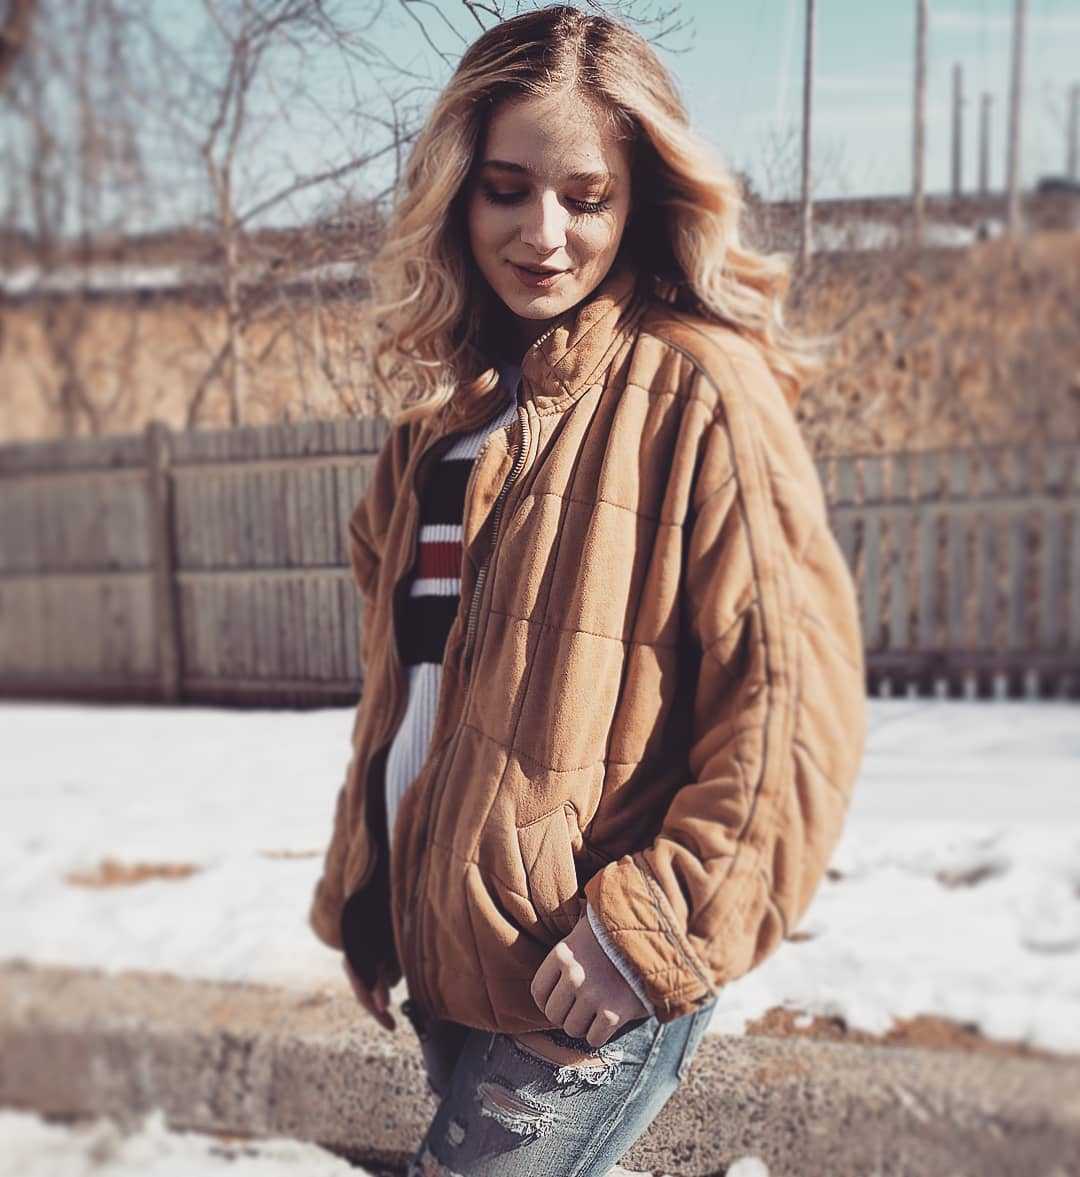 47 Nude Pictures Of Jackie Evancho Will Heat Up Your Blood With Fire And Energy For This Sexy Diva | Best Of Comic Books